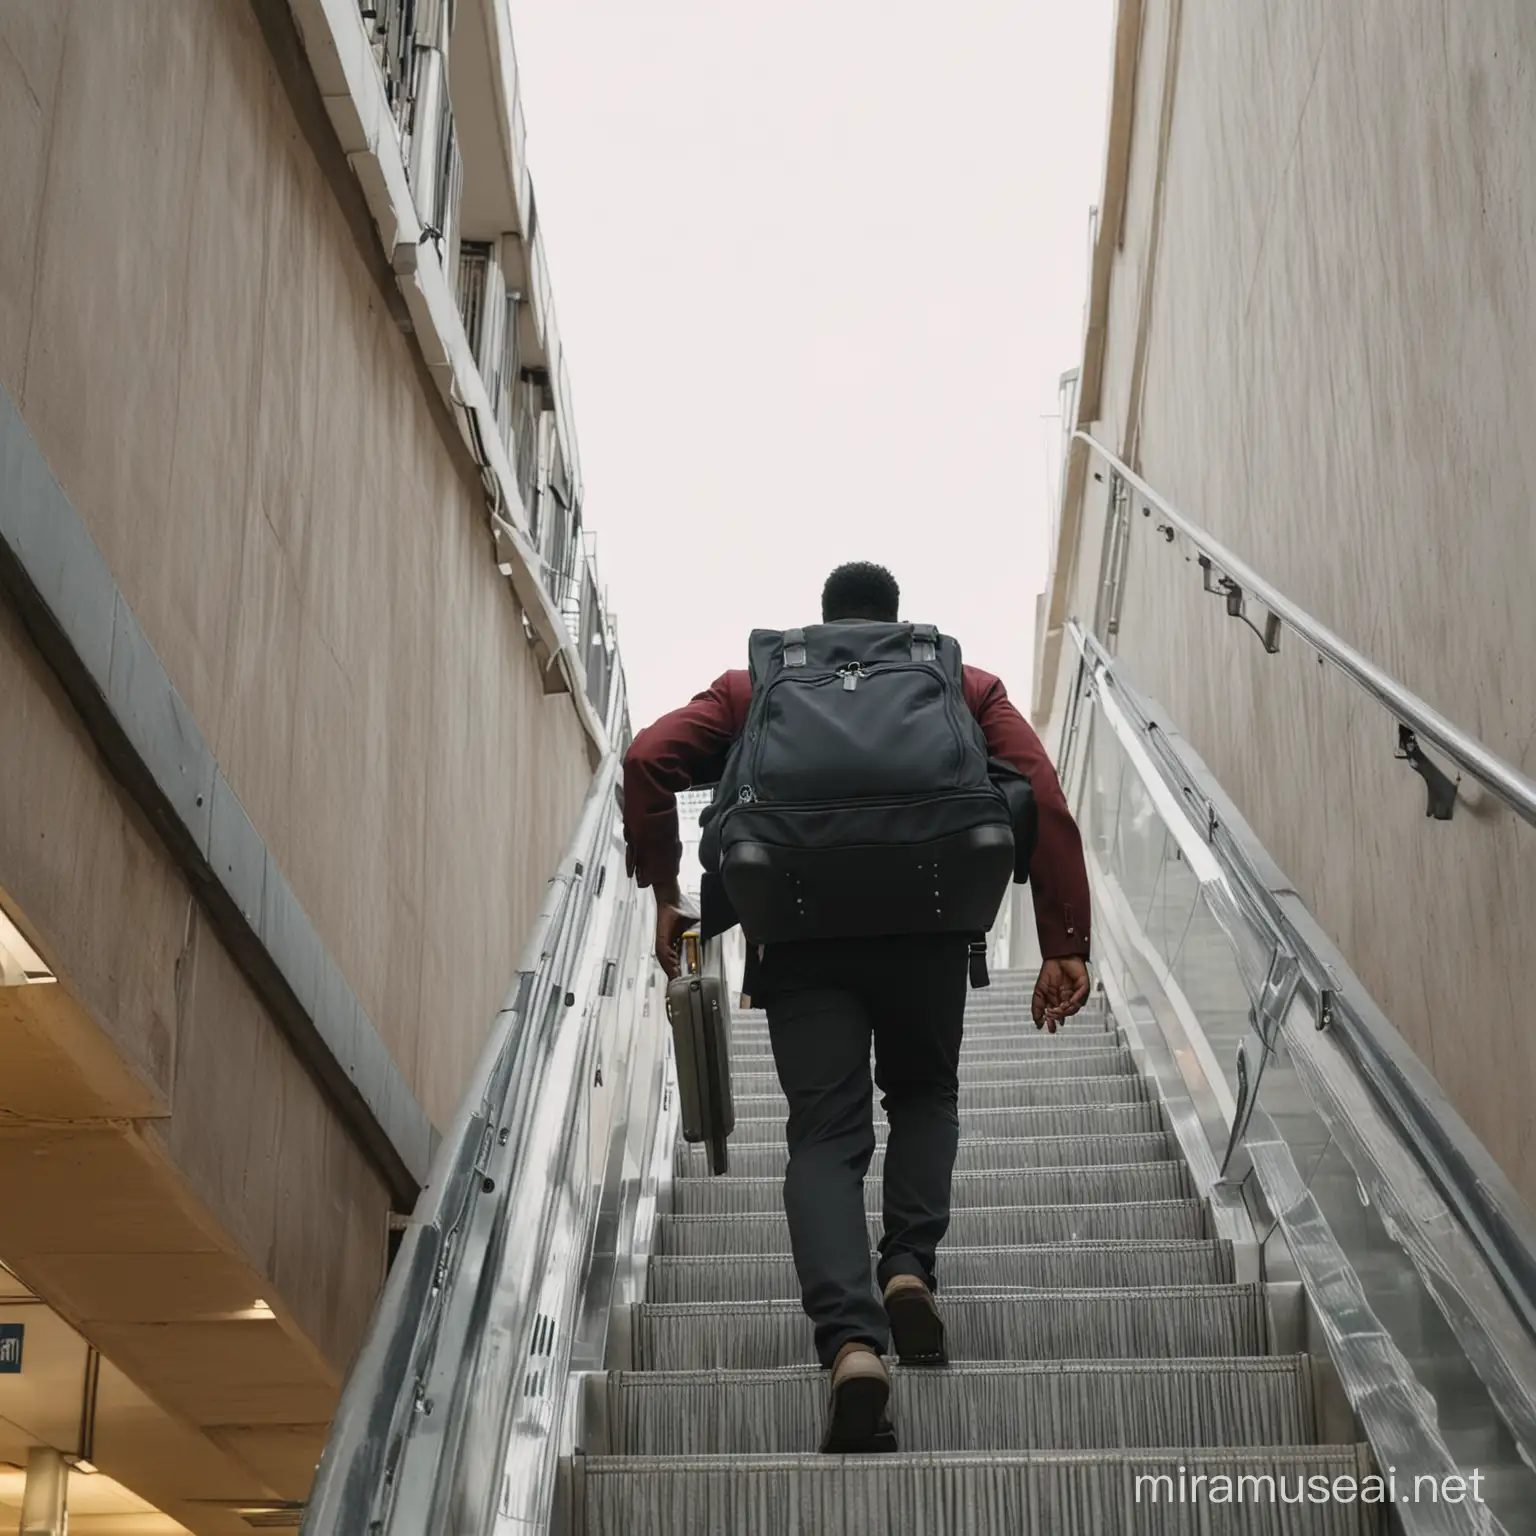 lower reverse  shot  of an African man holding luggage climbing to the top of an escalator